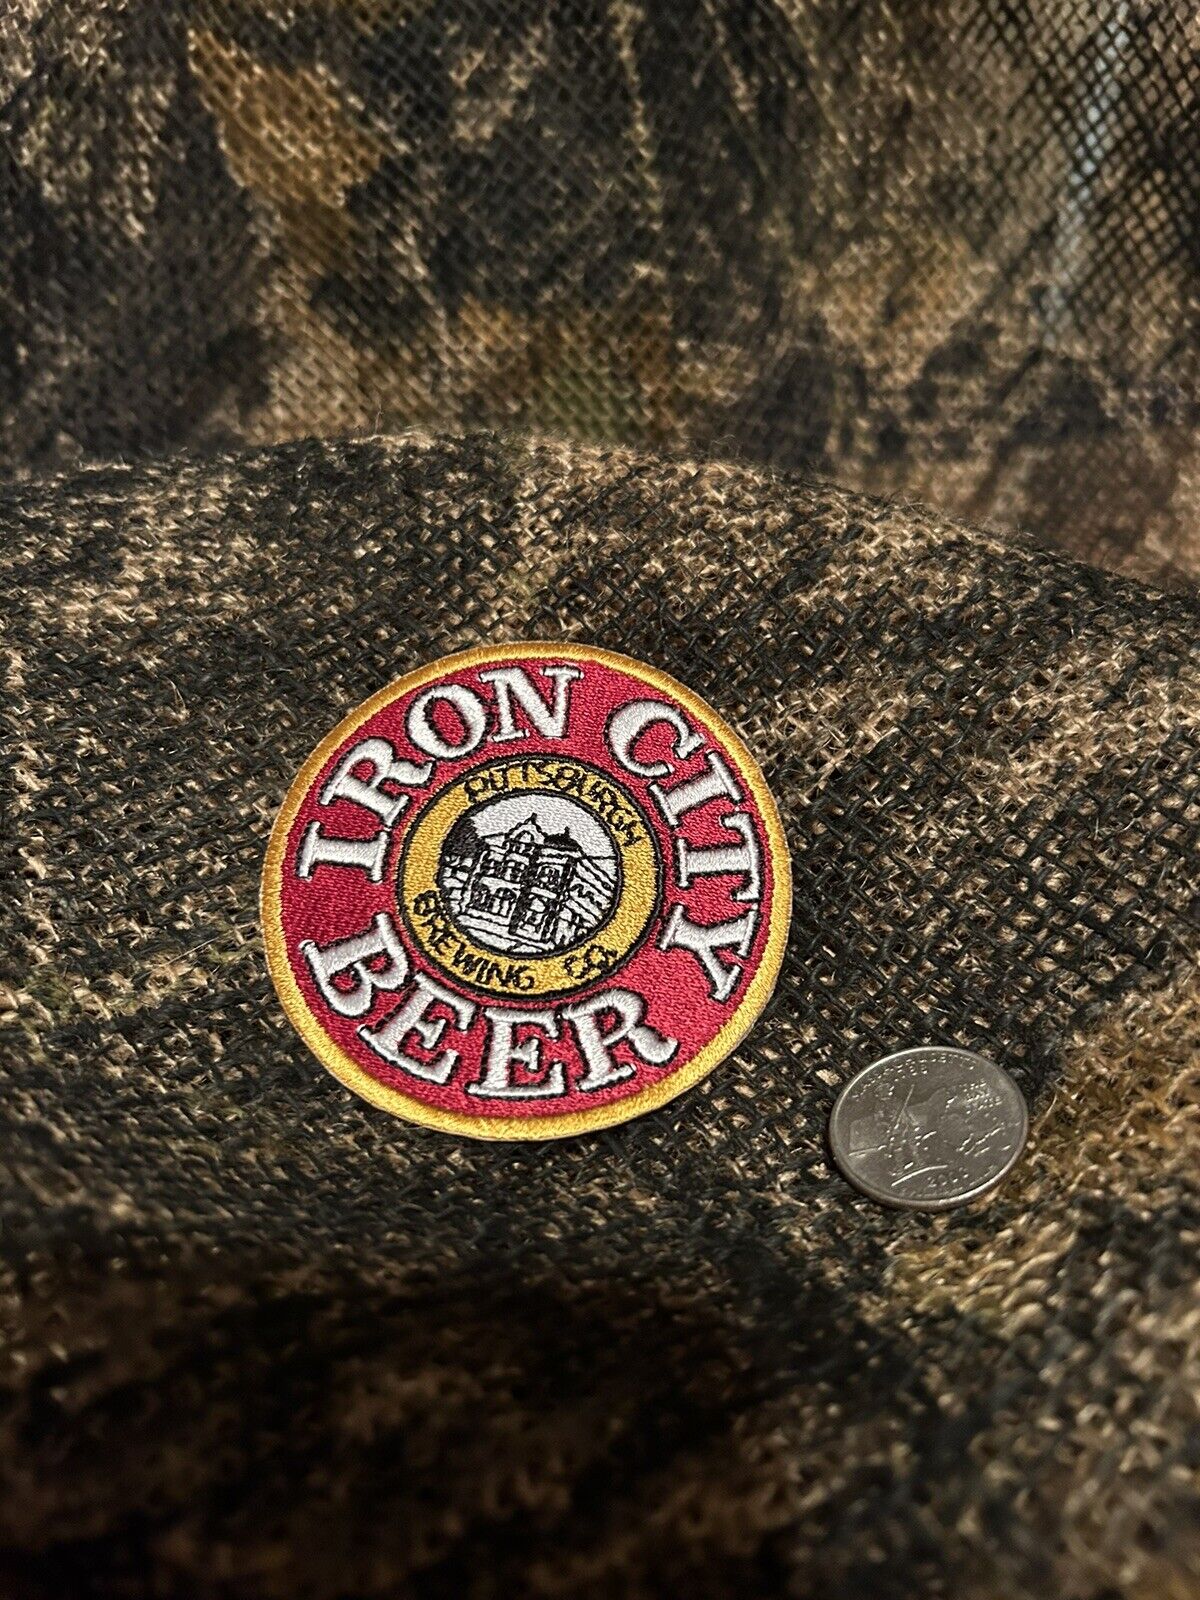 Iron City Beer Patch - Iron on Vintage 